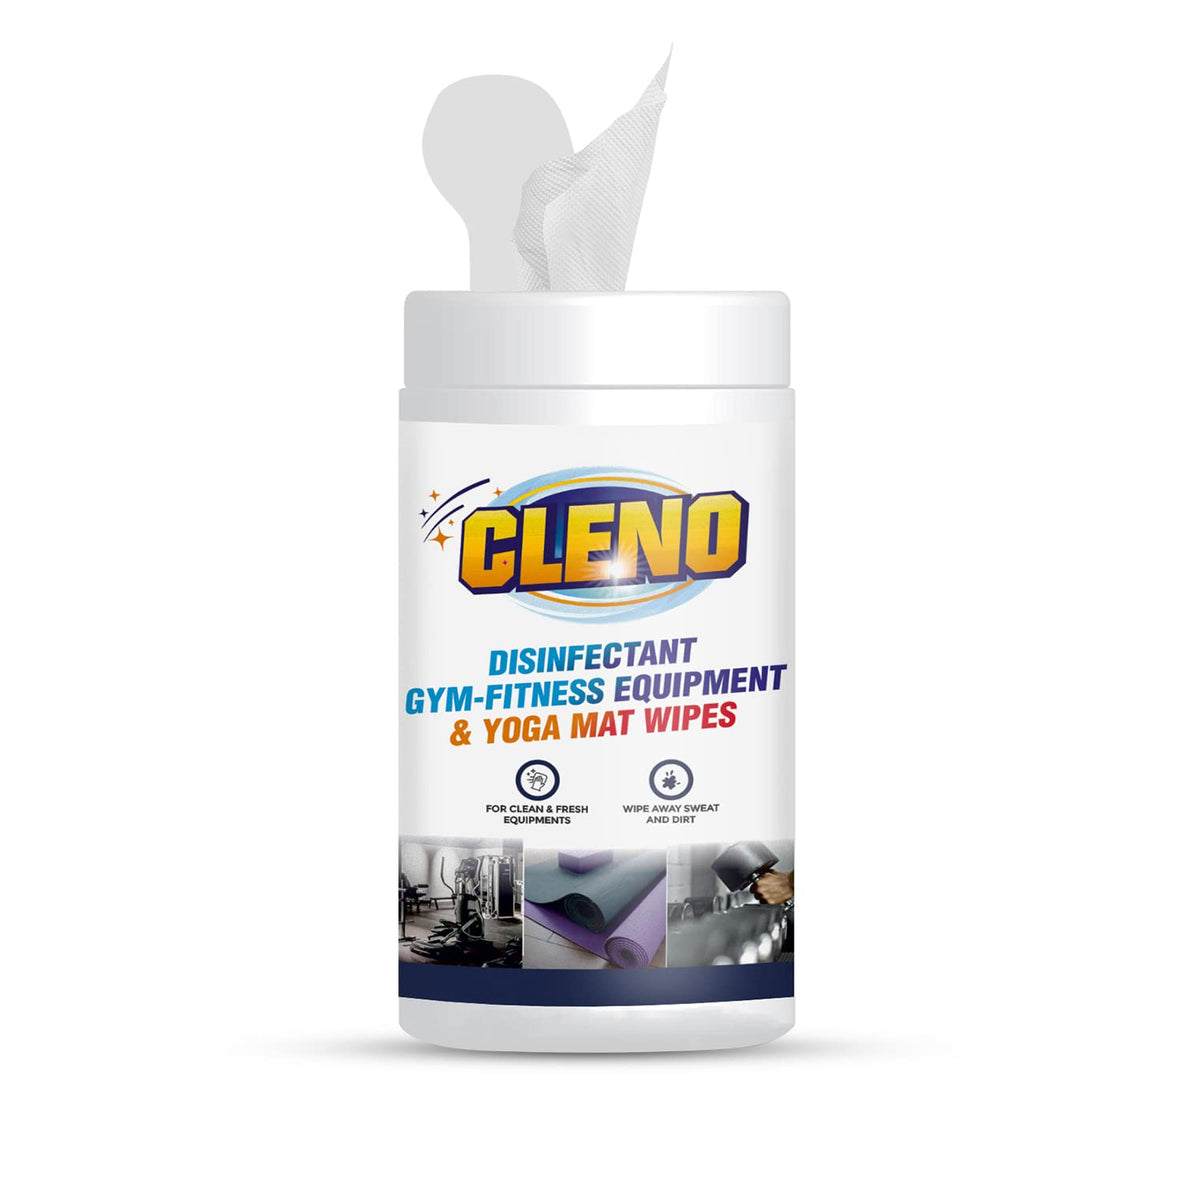 Cleno Disinfectant Gym Fitness Equipment & Yoga Mat Wet Wipes | Wipe Away Sweat and Dirt – 50 - Wipes (Ready to Use)